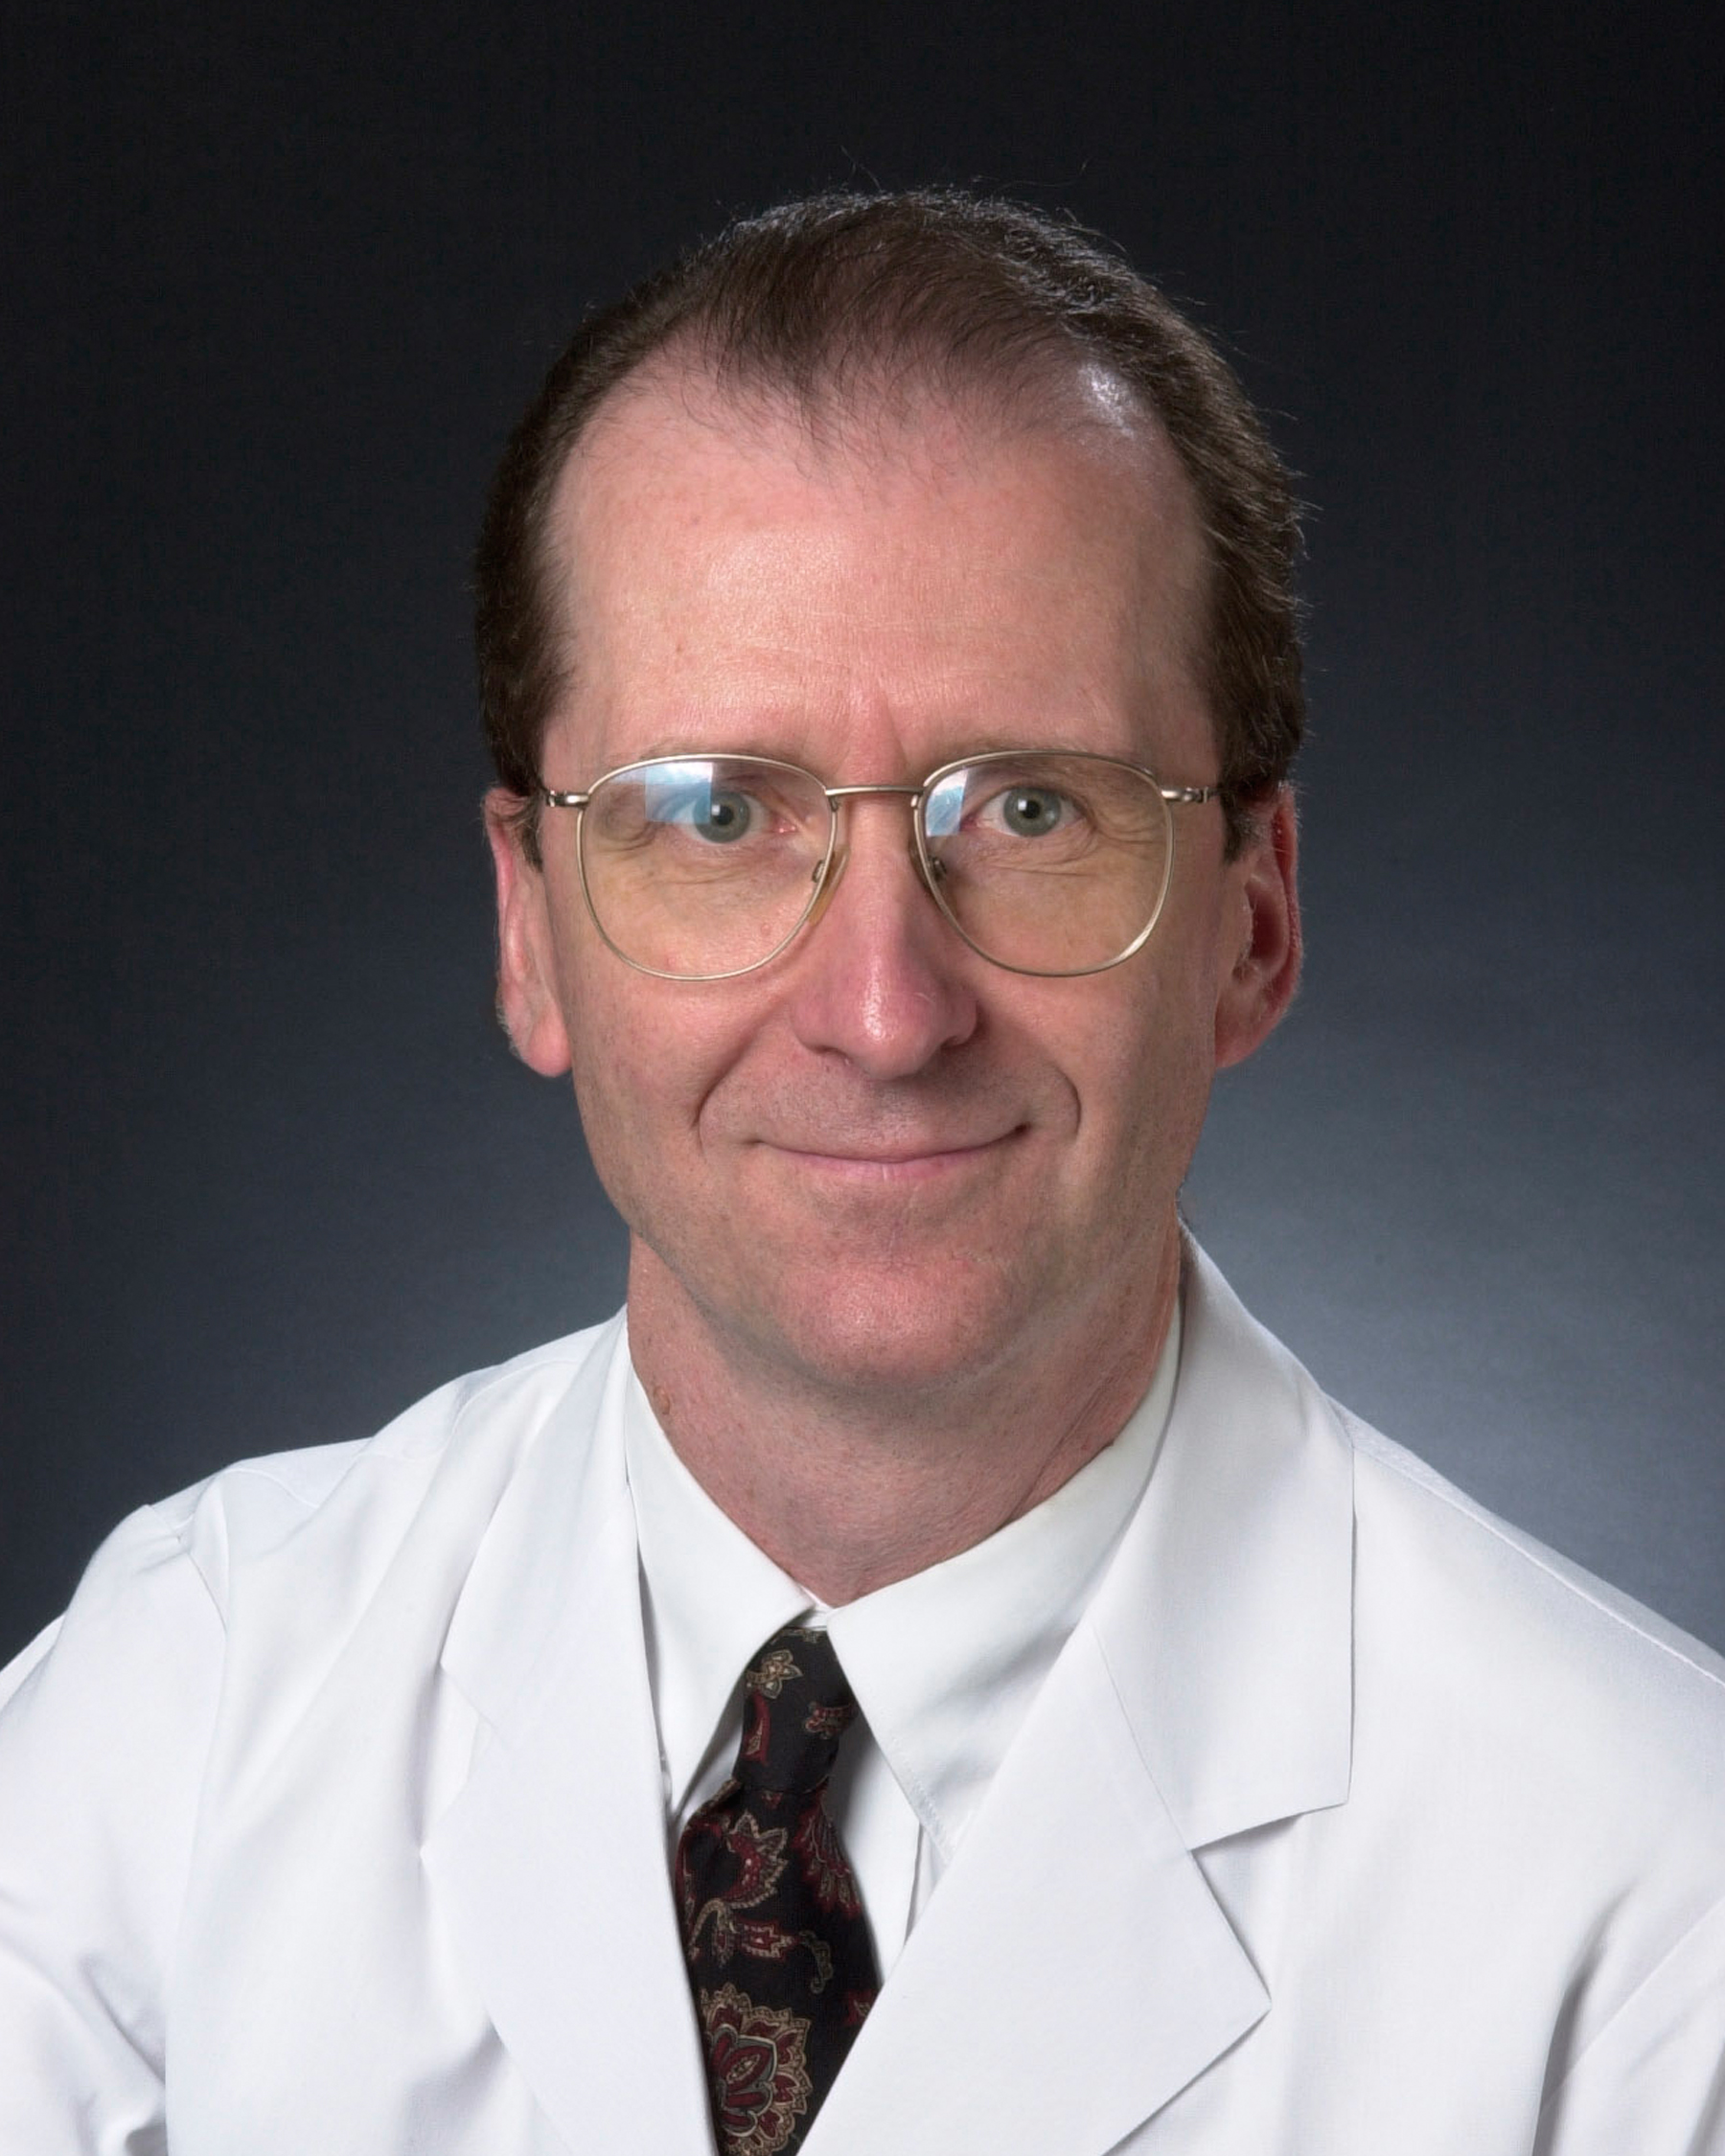 Donald Low, MD